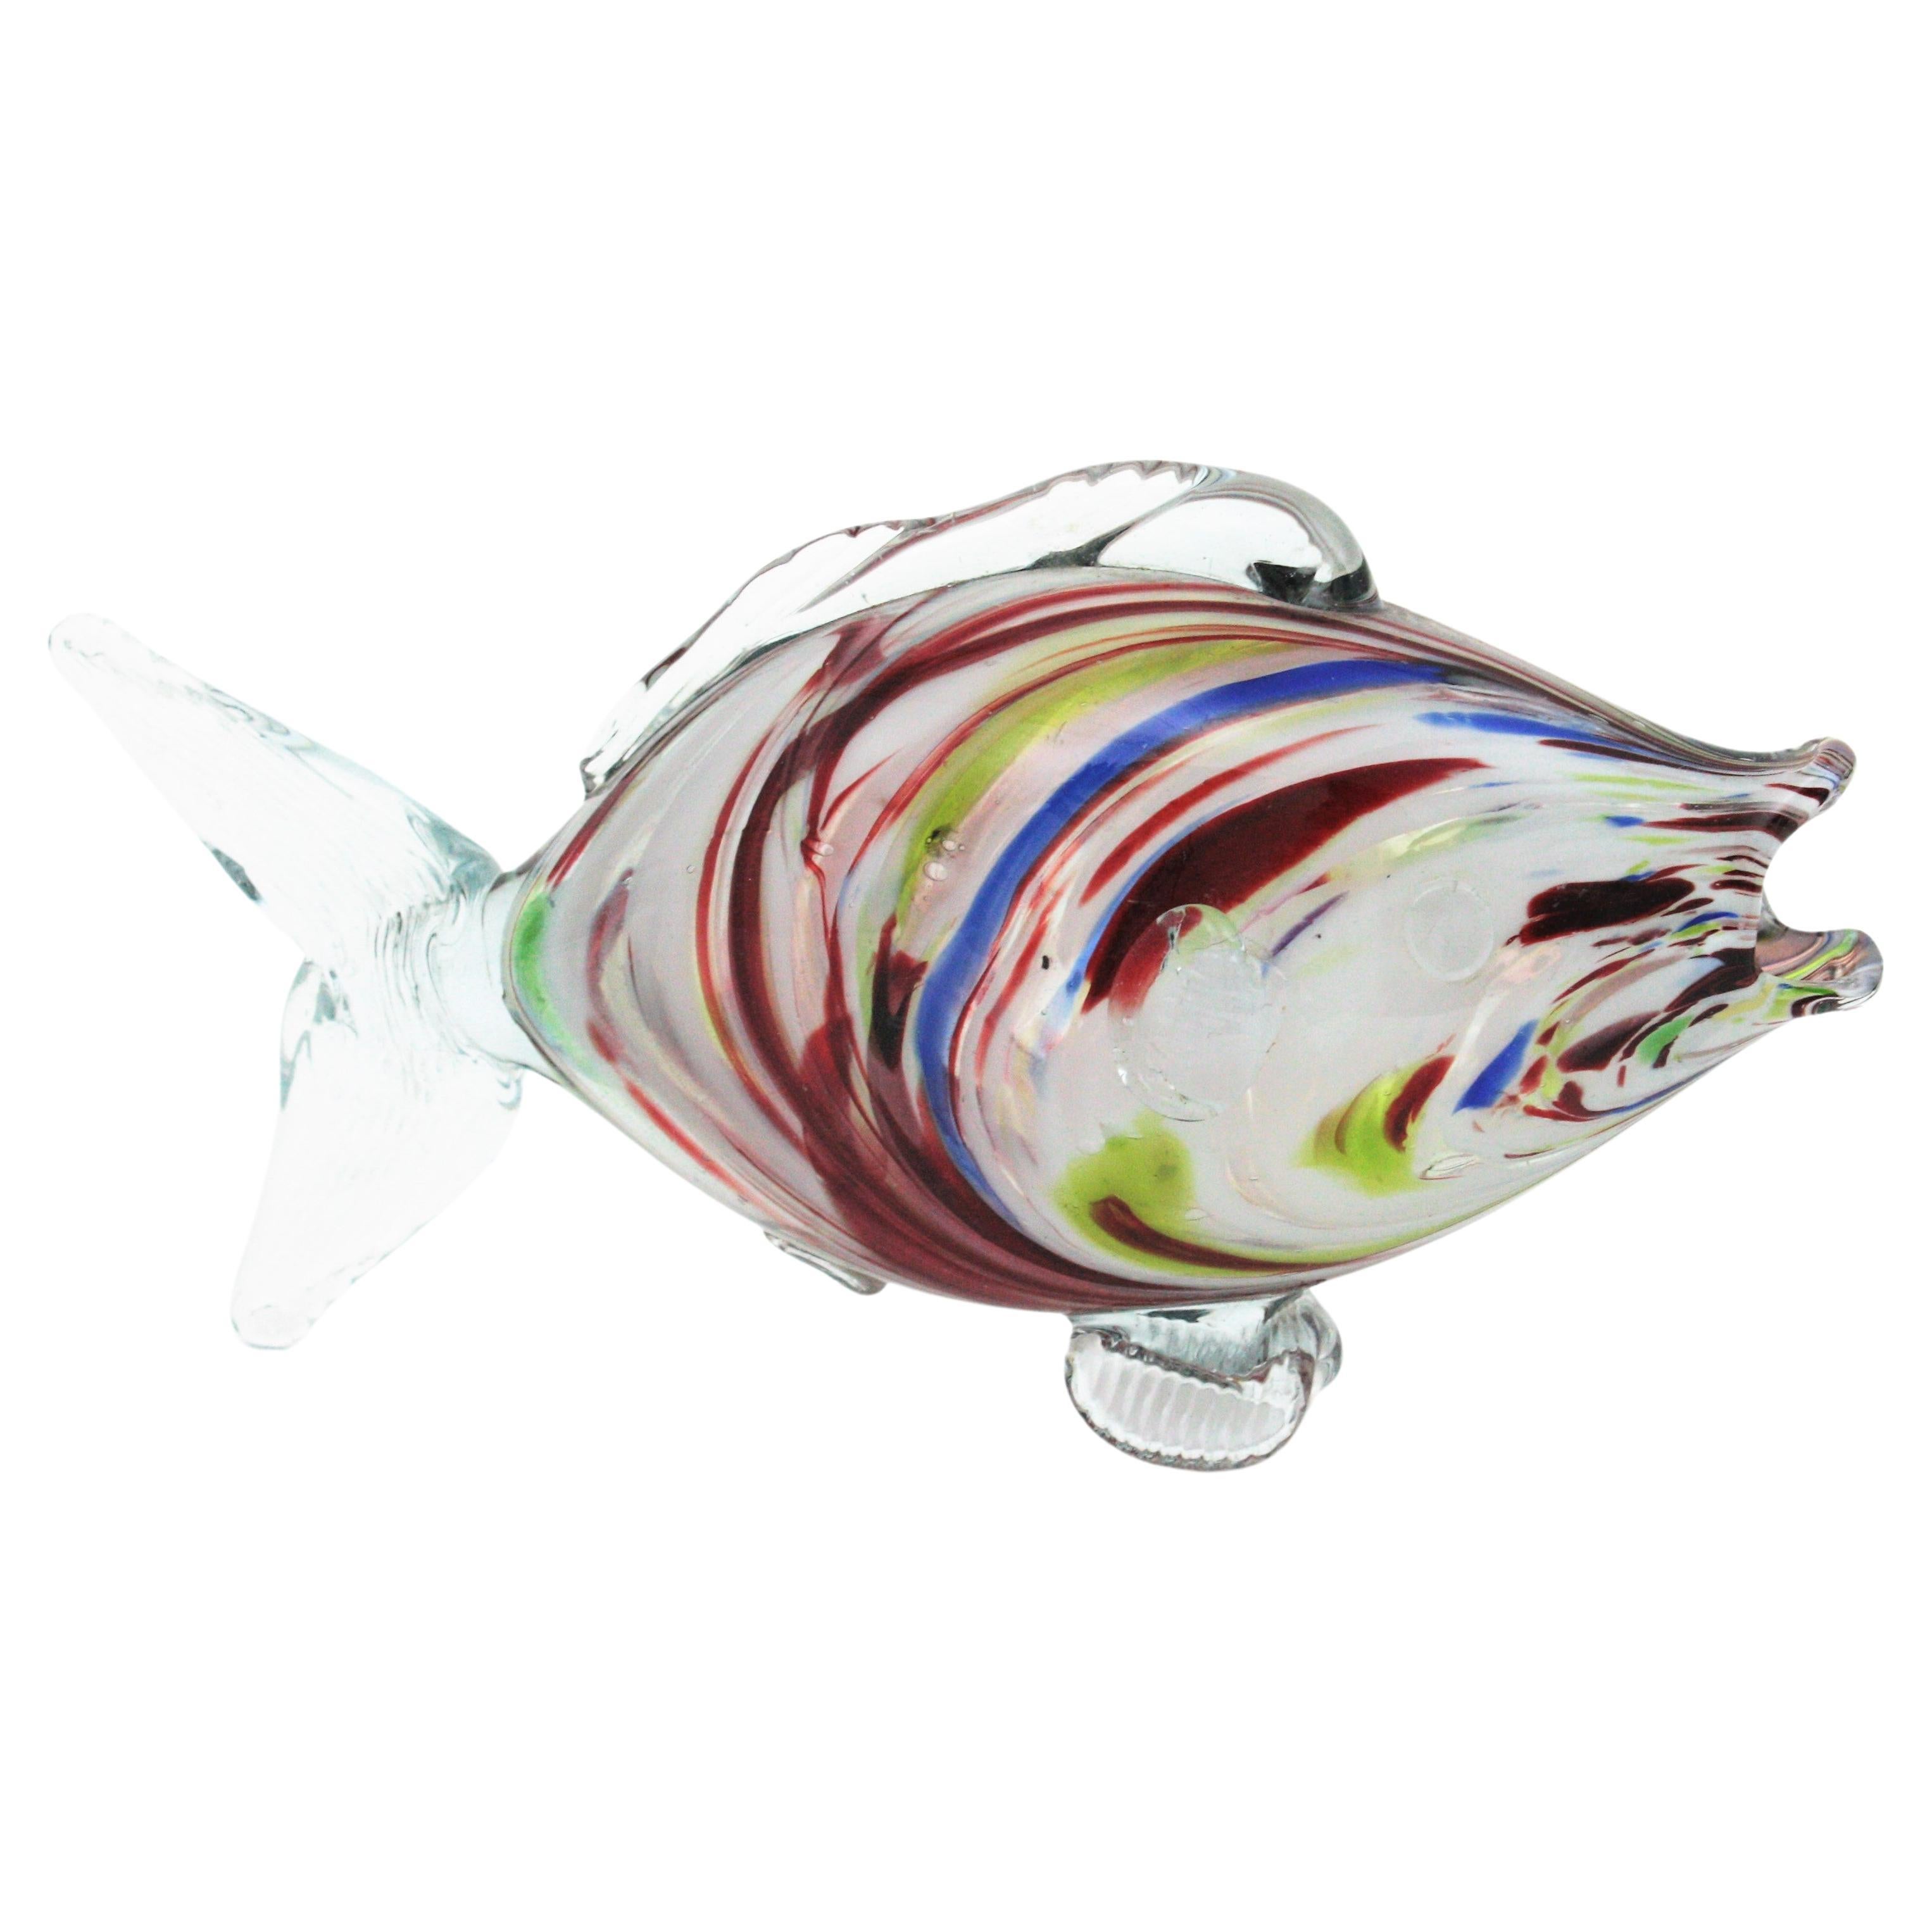 Mid-century Modern hand blown Murano glass fish figure with a clear glass body and strippes in red and white colors and accent in blue and green.
Italy 1950s. 
Each side of the body has different design.
Measures: 24 cm W x 13 cm H x 7 cm